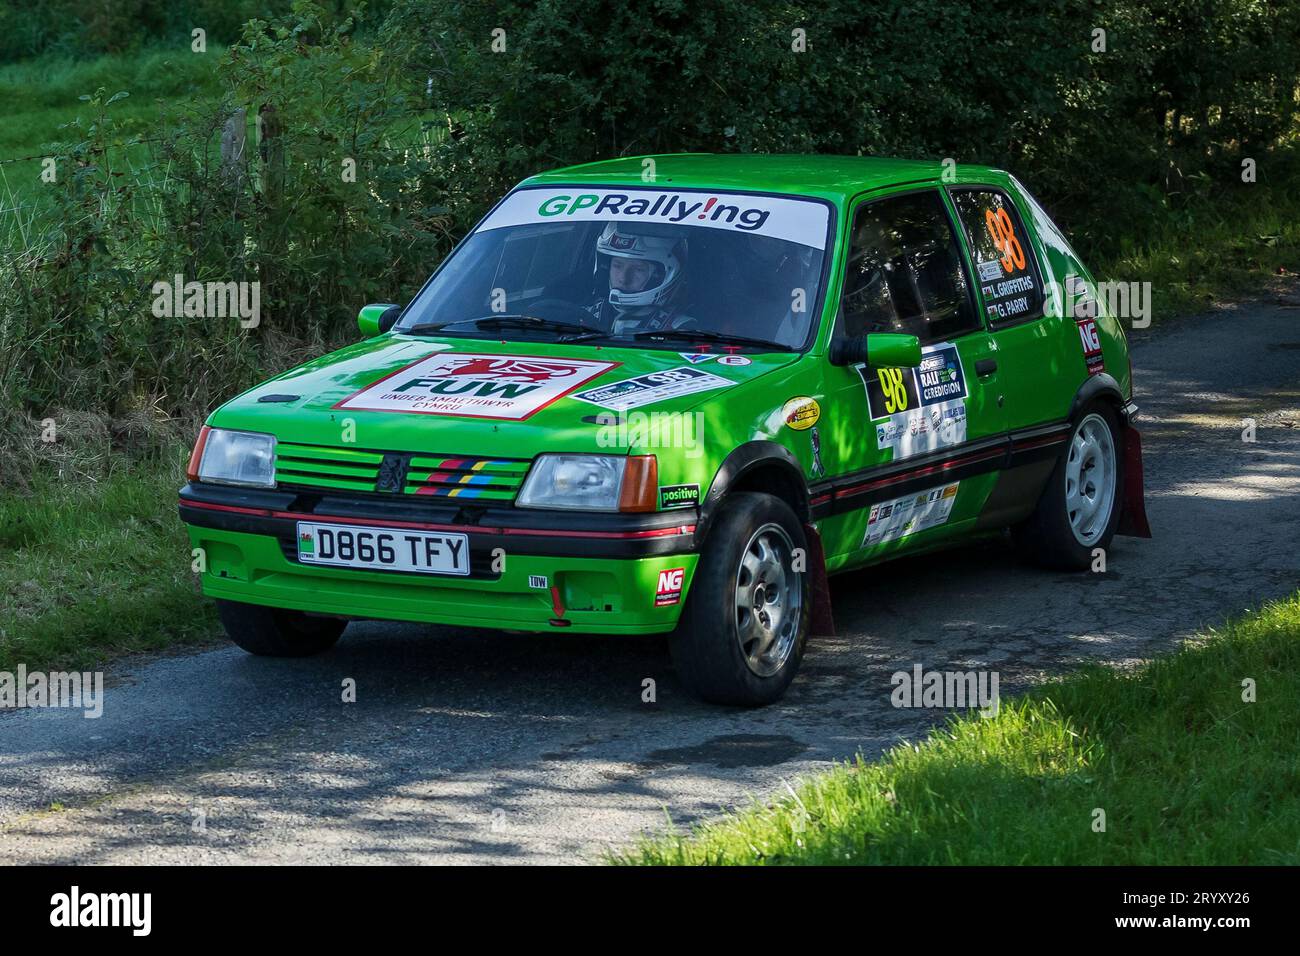 Ceredigion, Wales  - 02 September 2023 Rali Ceredigion: Gareth Parry and Co-Driver Lewis Griffiths in a Peugeot 205 car 98 on stage SS1 Borth 1   Wale Stock Photo